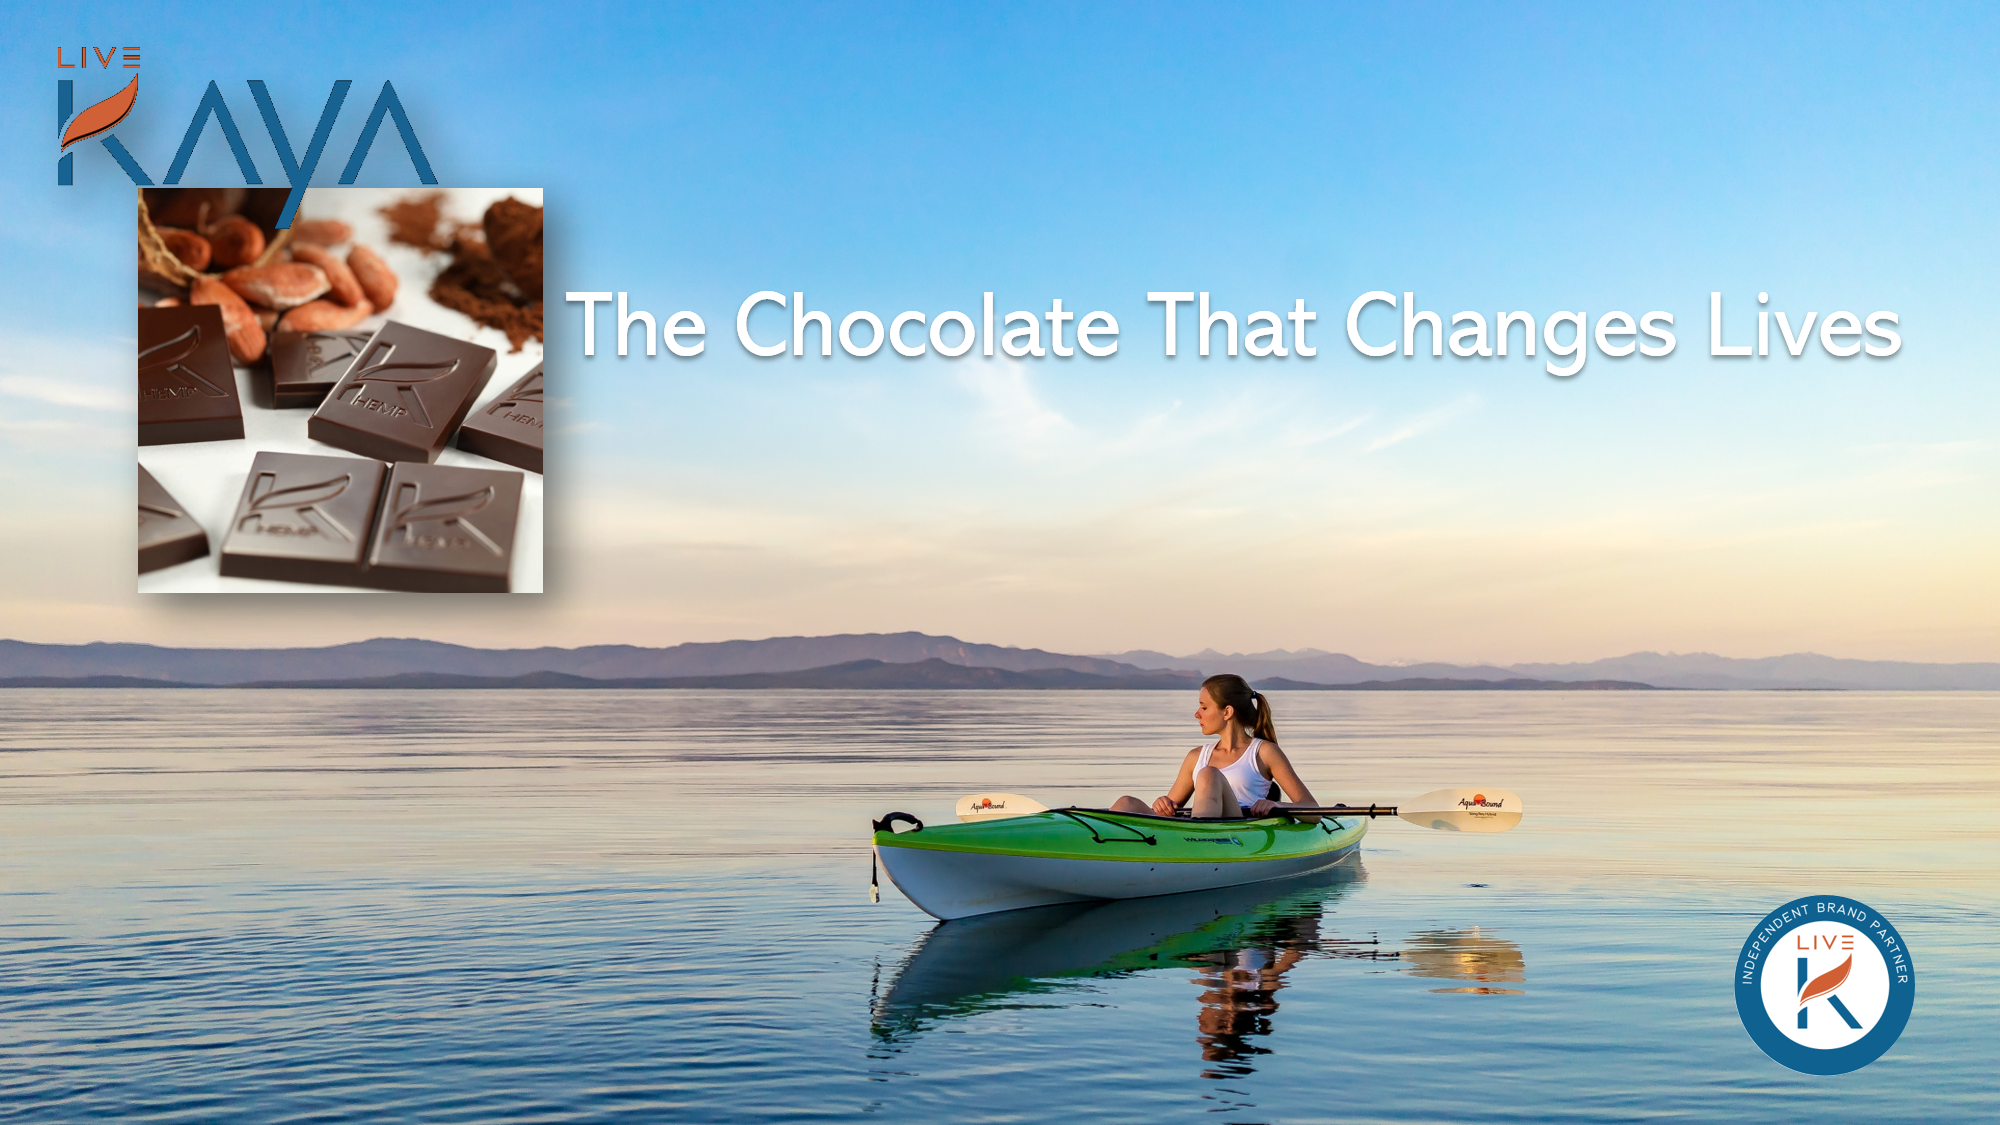 Live Kaya the chocolate that changes lives